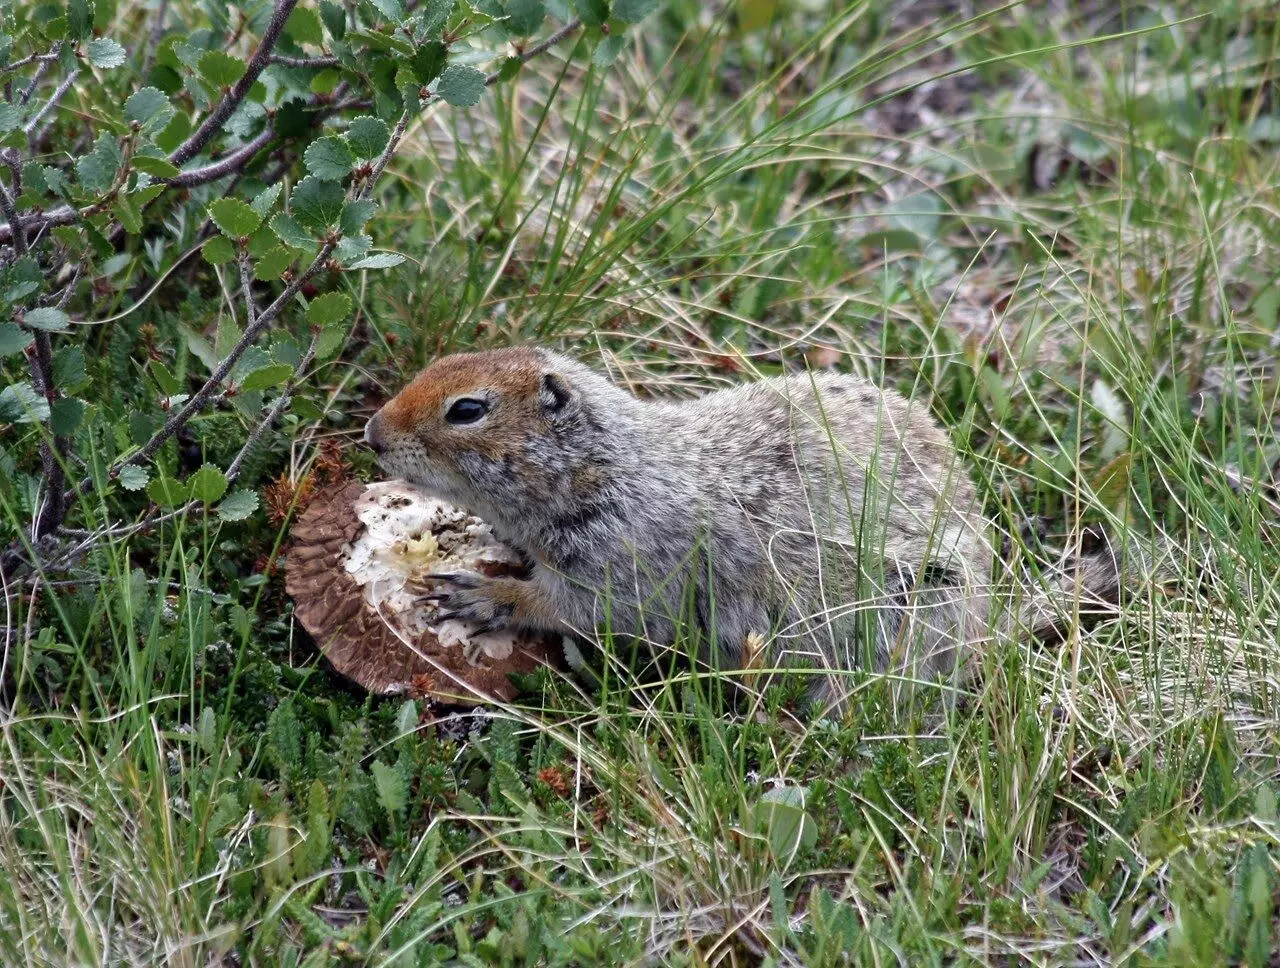 Climate change altered Hibernation periods of Arctic ground squirrels: Study